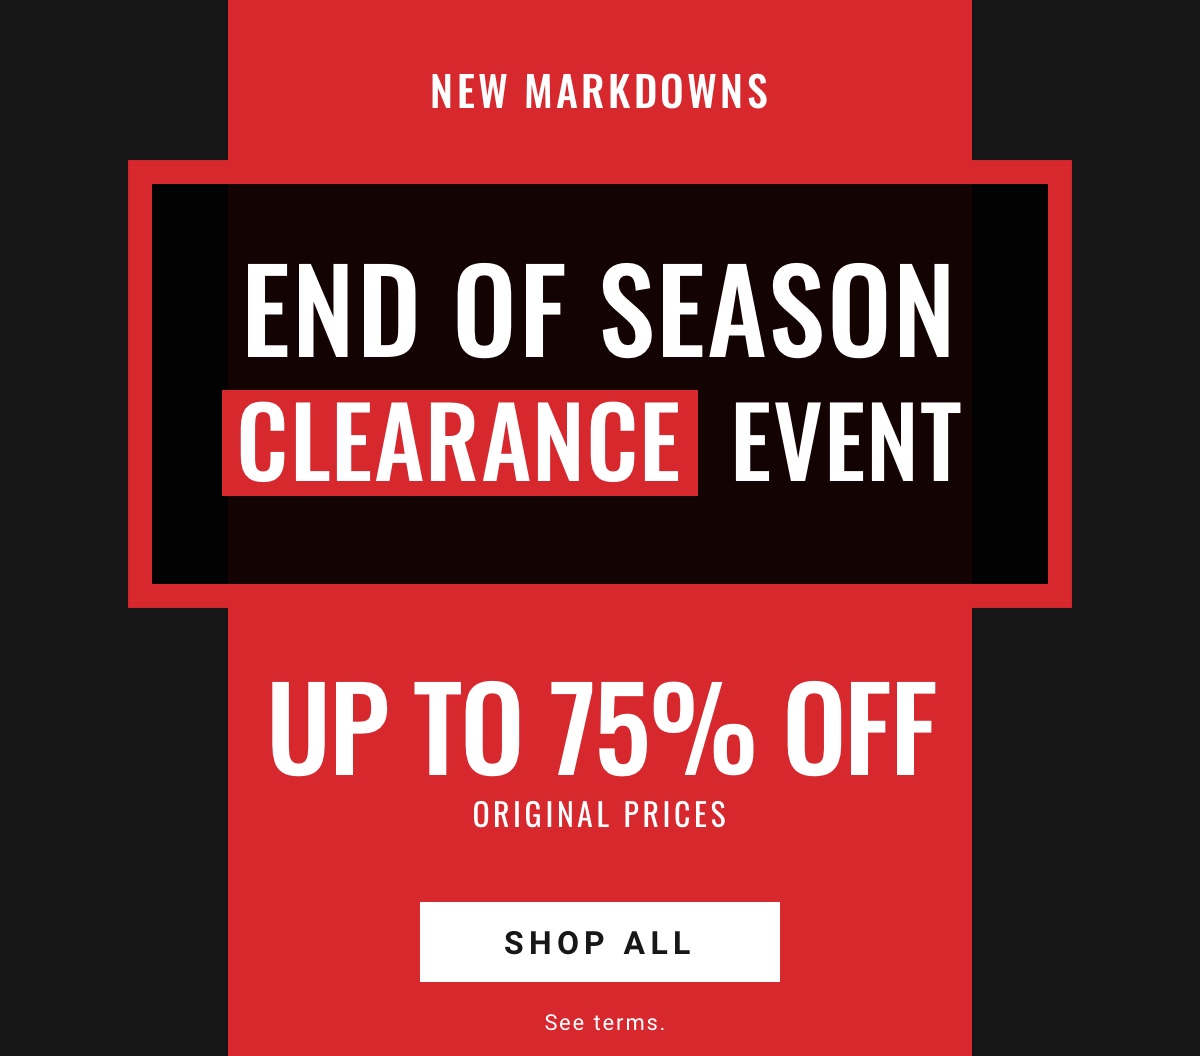 New Markdowns End of Season Clearance Event Up to 75% off Original Prices Shop All See terms.